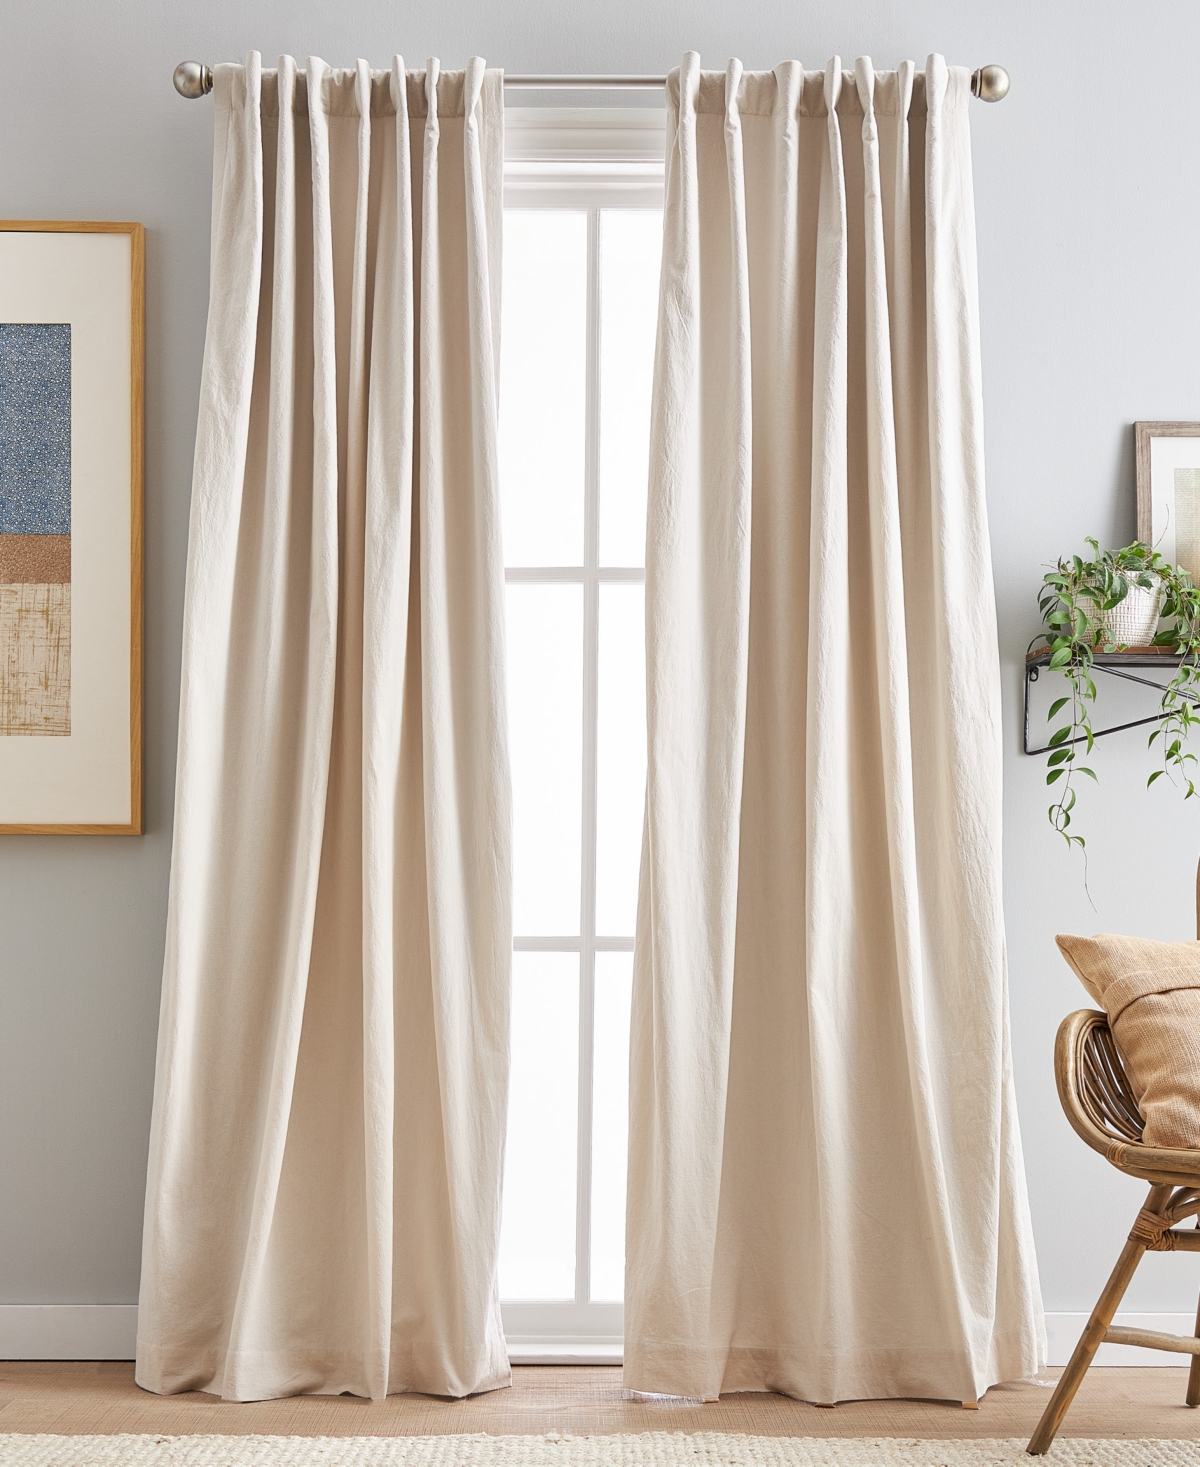 Peri Home Sanctuary Back Tab Lined 2-piece Curtain Panel Set, 50" X 108" In Linen